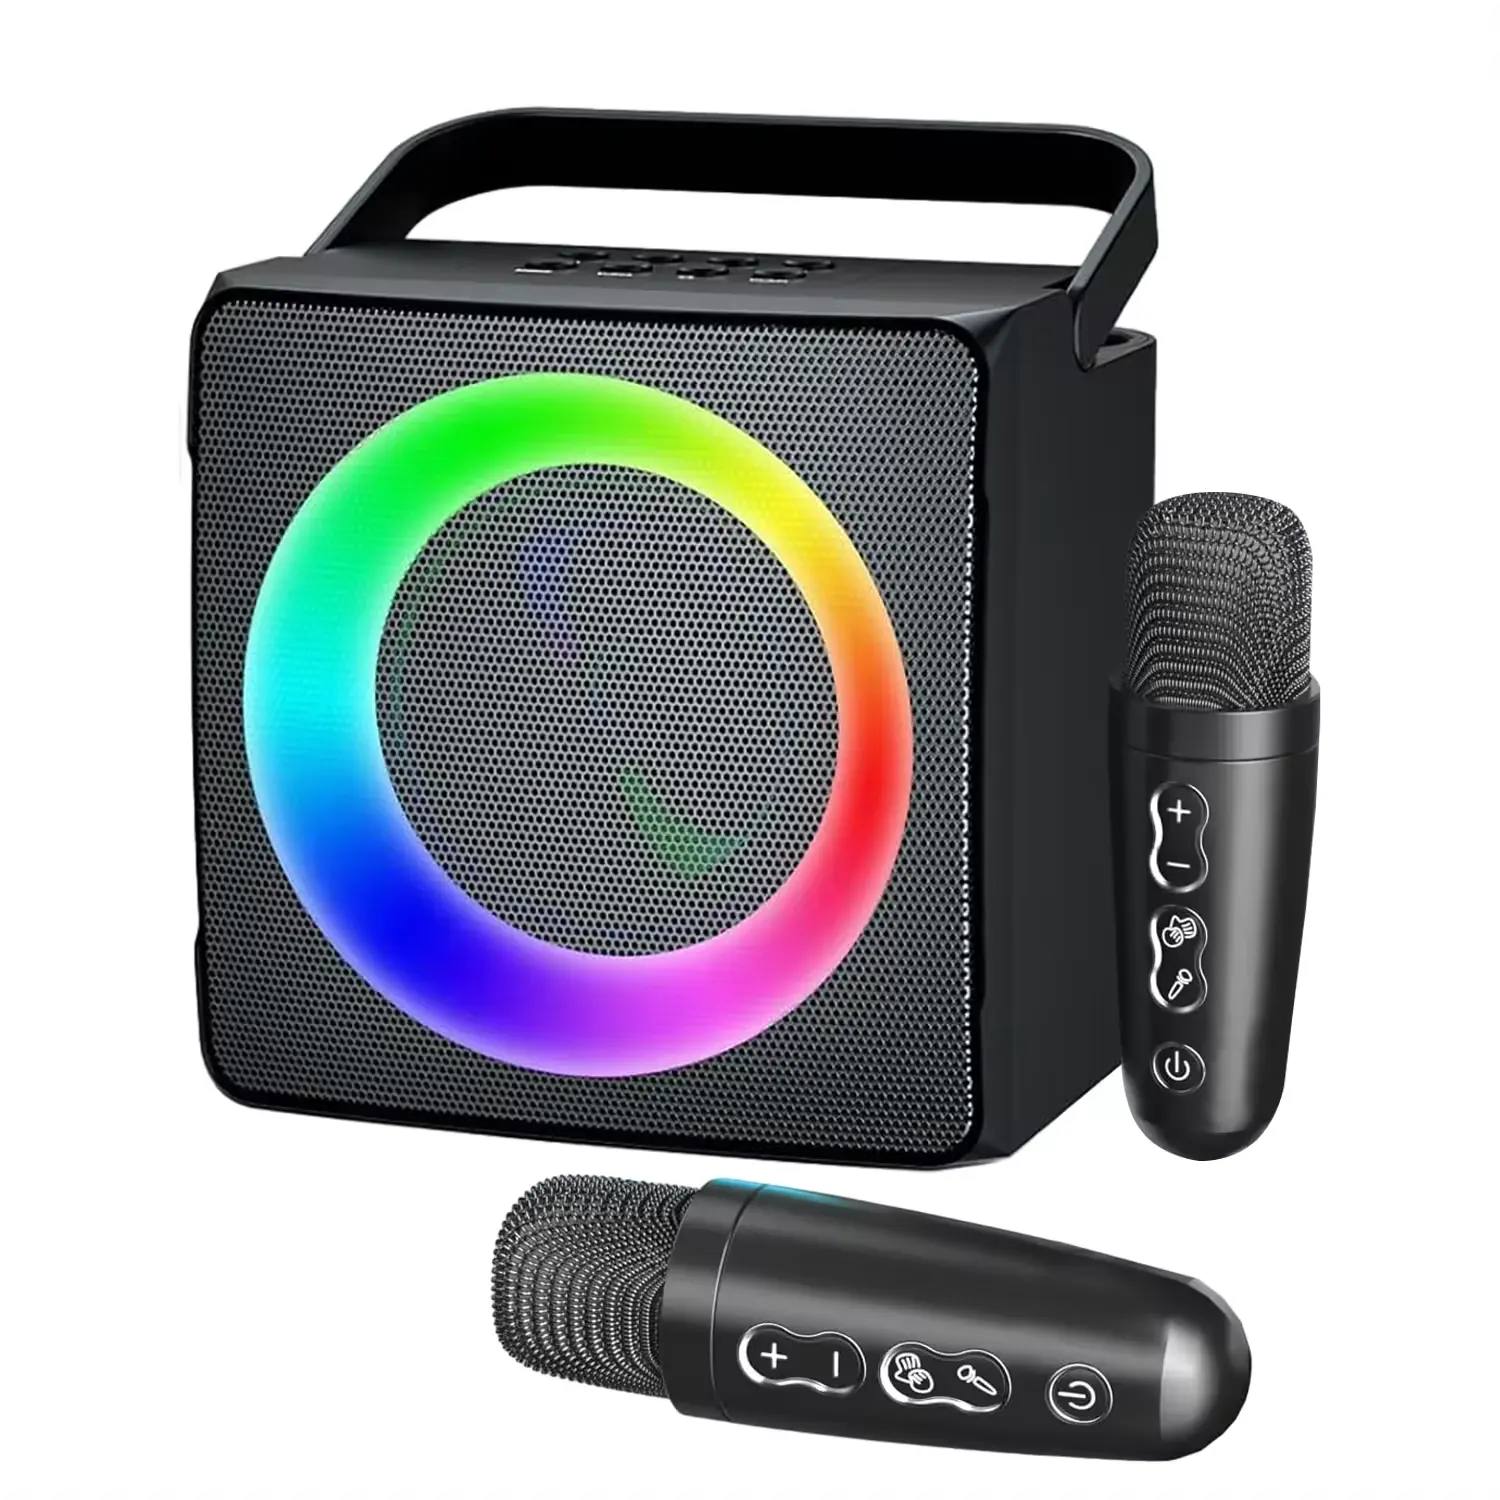 SD508 Karaoke players,Portable Bluetooth Karaoke Speaker for Adults Kids,Singing Machine with 2 Wireless Mics and Dynamic Lights